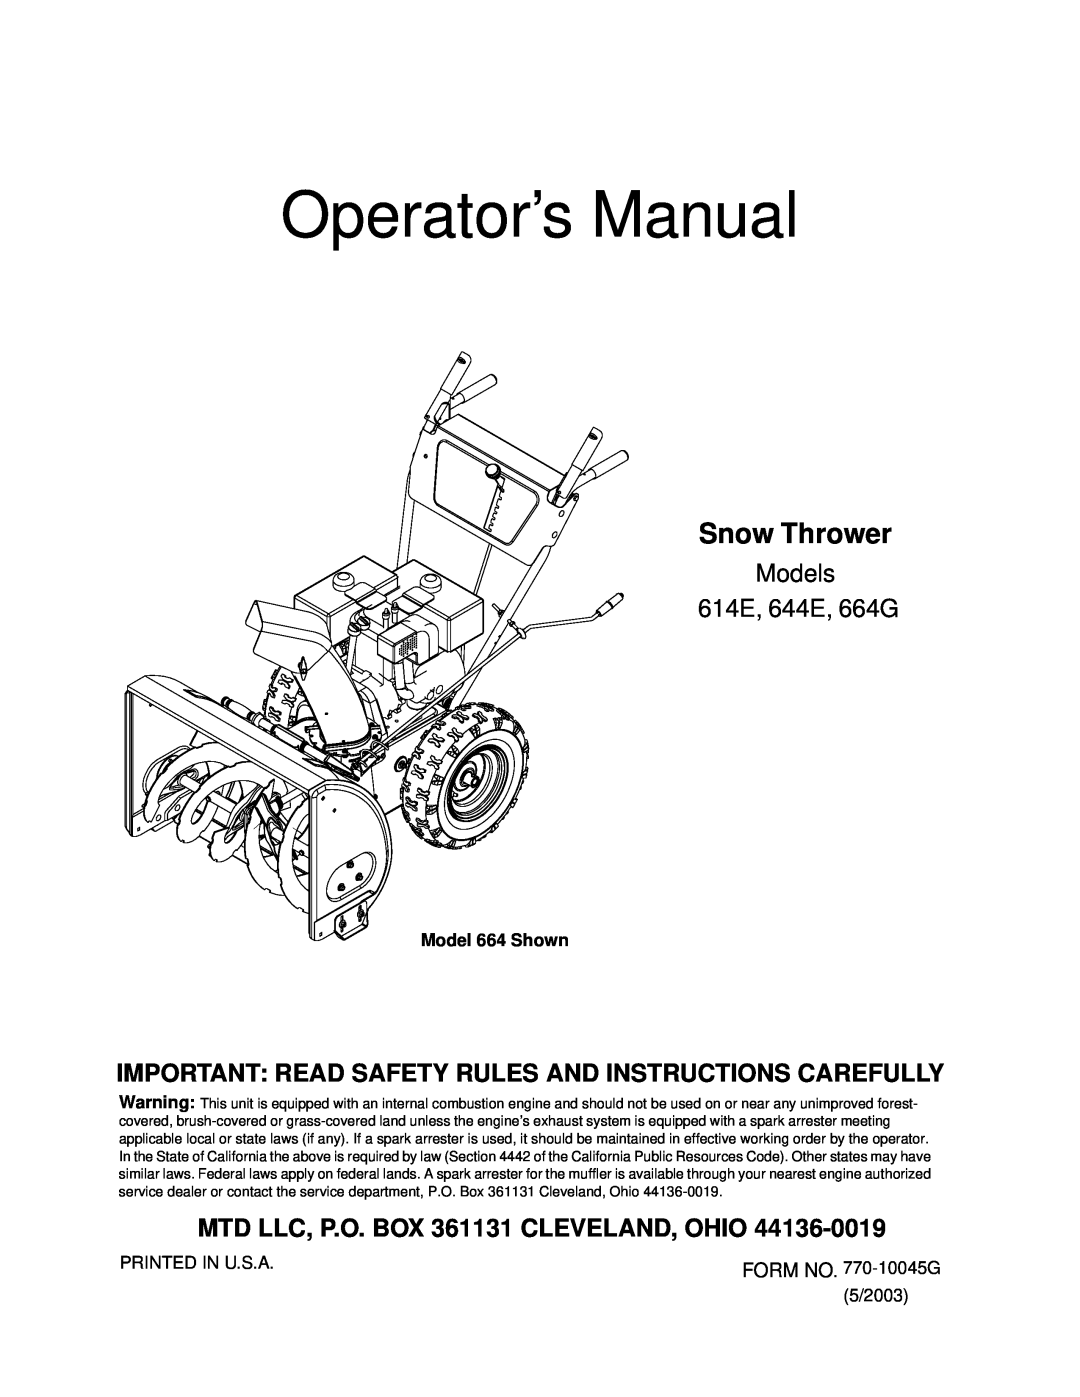 MTD 614E manual Model 664 Shown, Operator’s Manual, Snow Thrower, Important Read Safety Rules And Instructions Carefully 